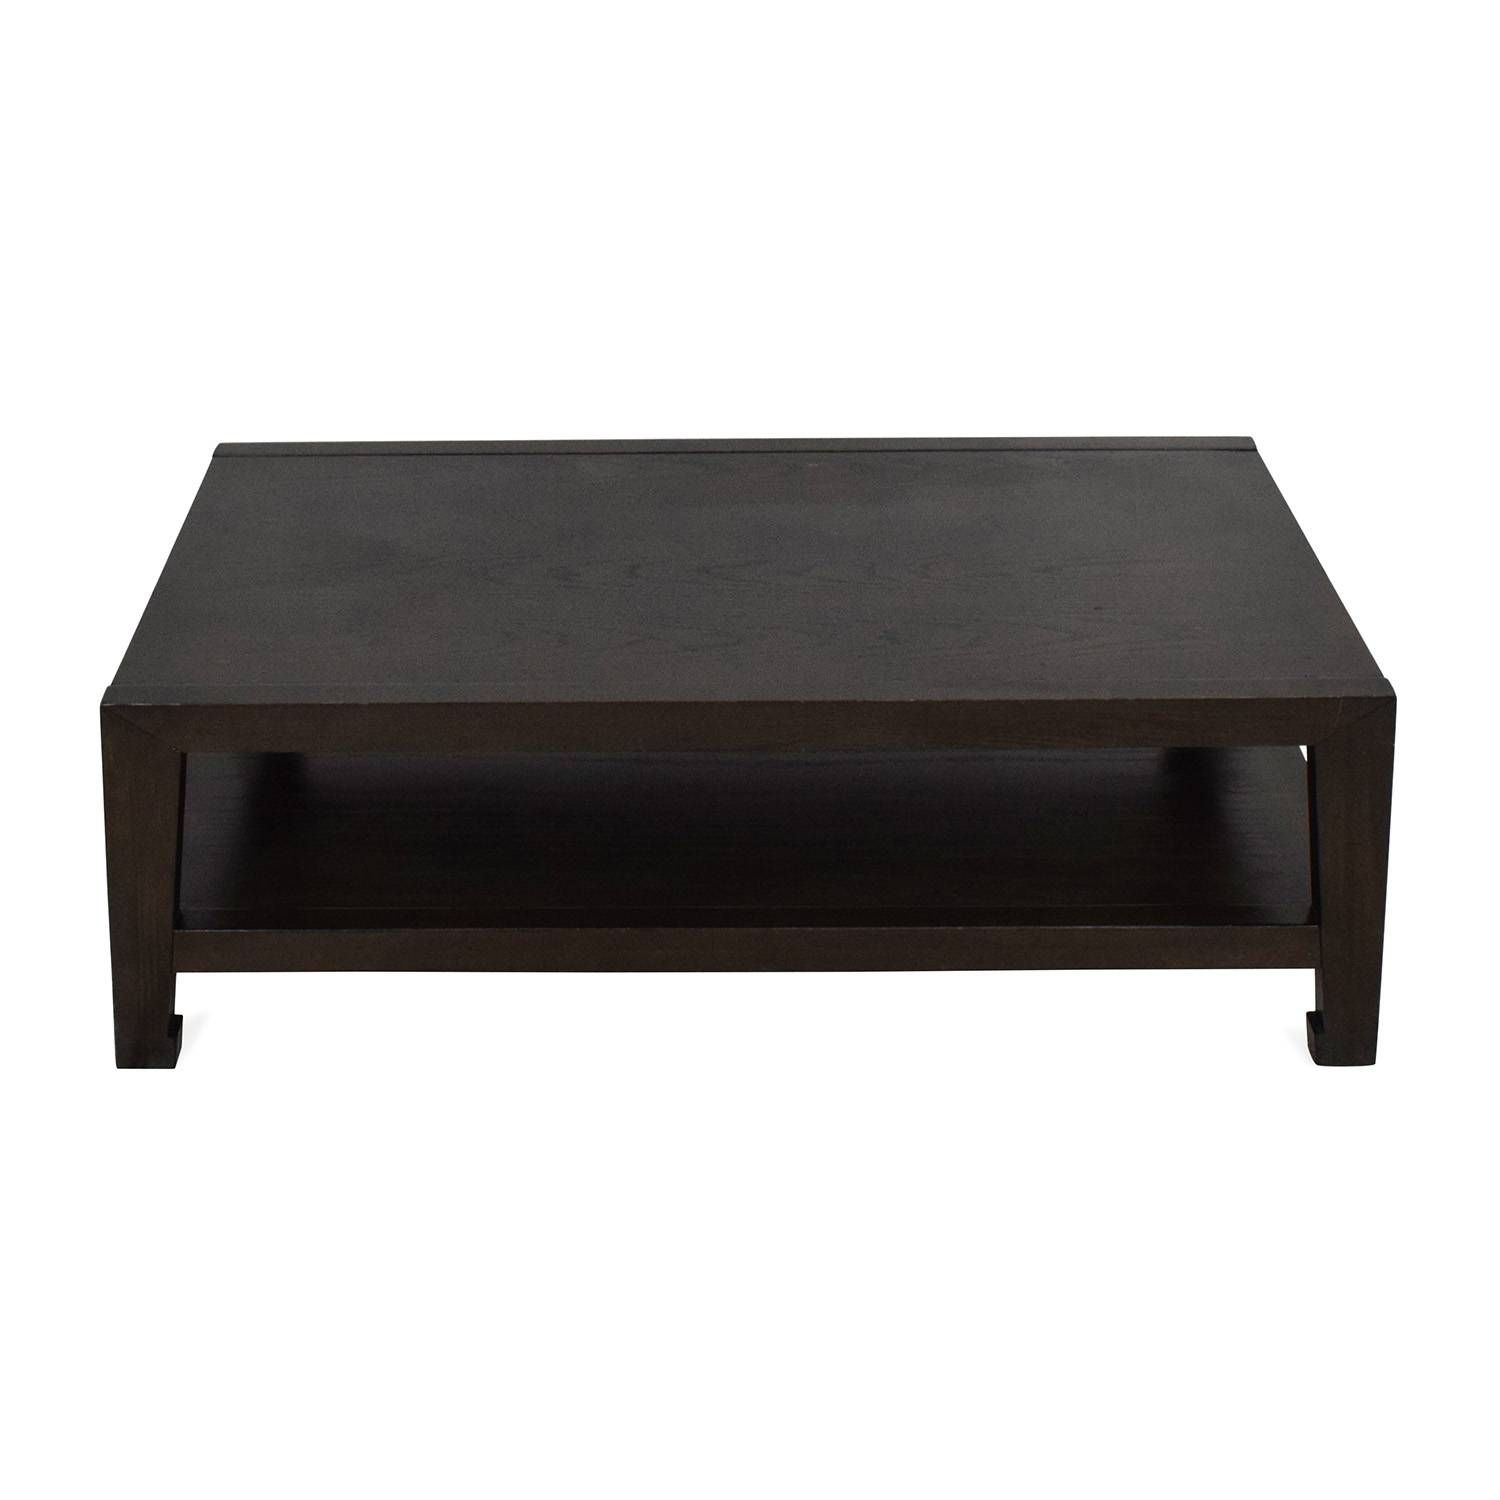 77% Off – Wooden & Tiled Coffee Table / Tables In Dark Wood Coffee Tables (View 7 of 15)